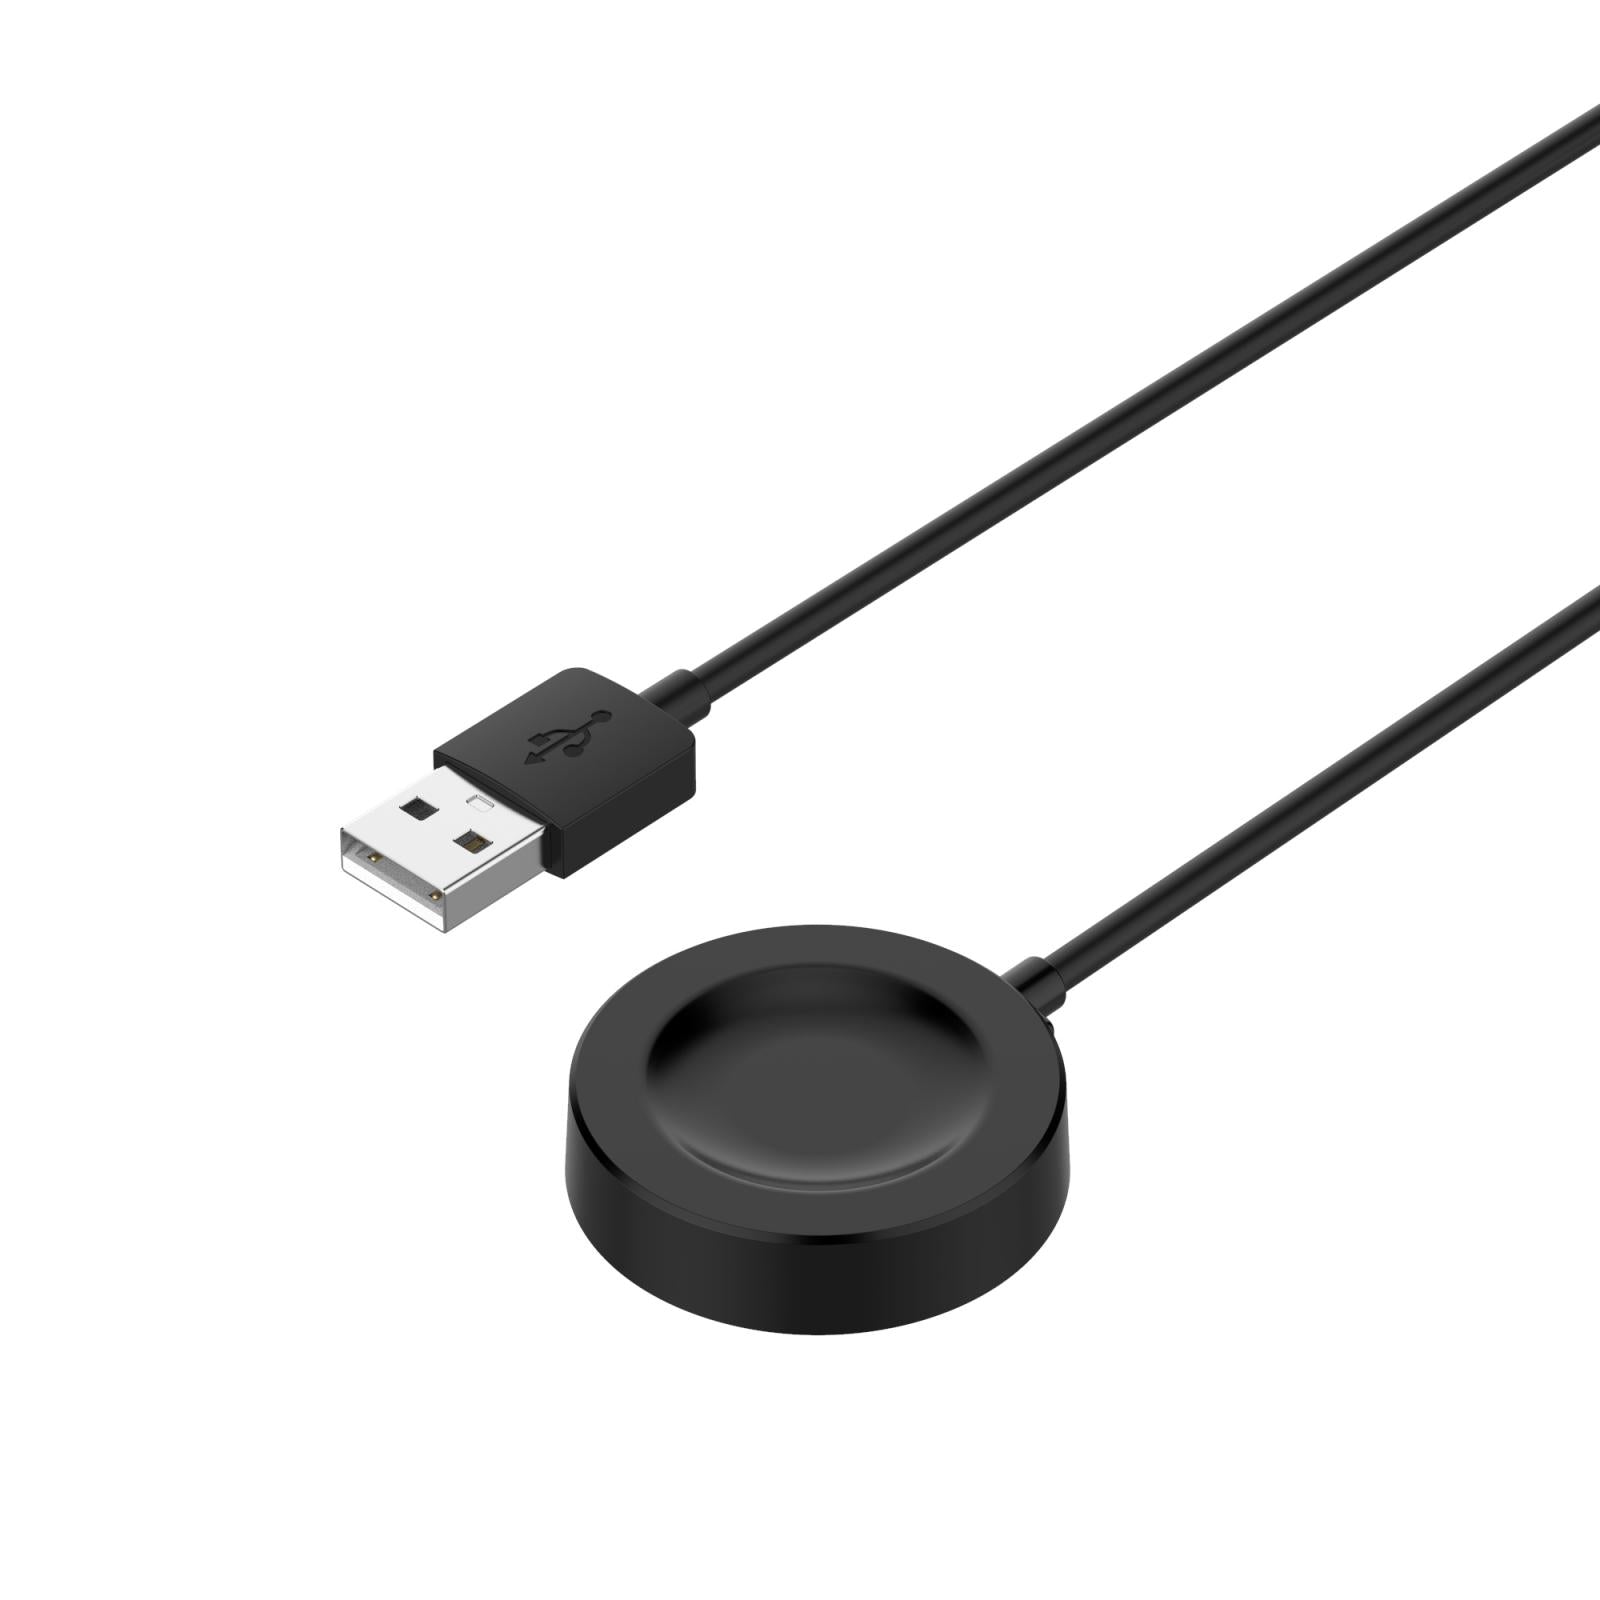 Charging Dock Holder Charger Cable for Huawei GT2 Pro Watch Black